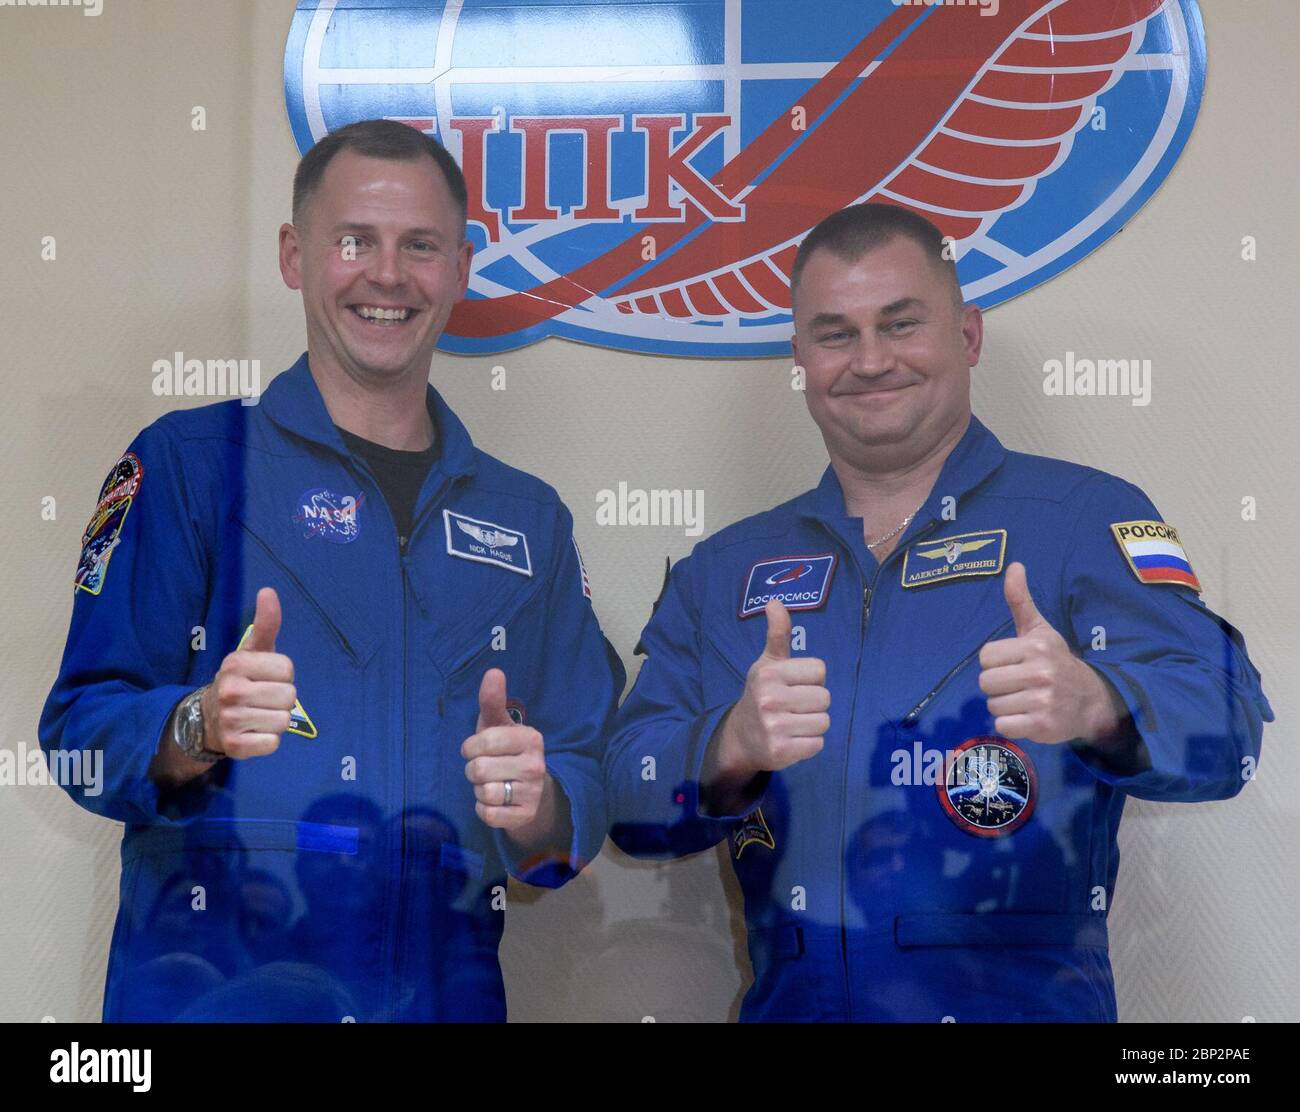 Expedition 57 Press Conference  Expedition 57 Flight Engineer Nick Hague of NASA, left, and Flight Engineer Alexey Ovchinin of Roscosmos pose for a photo following a crew press conference, Wednesday, Oct. 10, 2018 at the Cosmonaut Hotel in  Baikonur, Kazakhstan. Hague and Ovchinin are scheduled to launch on October 11 and will spend the next six months living and working aboard the International Space Station. Stock Photo